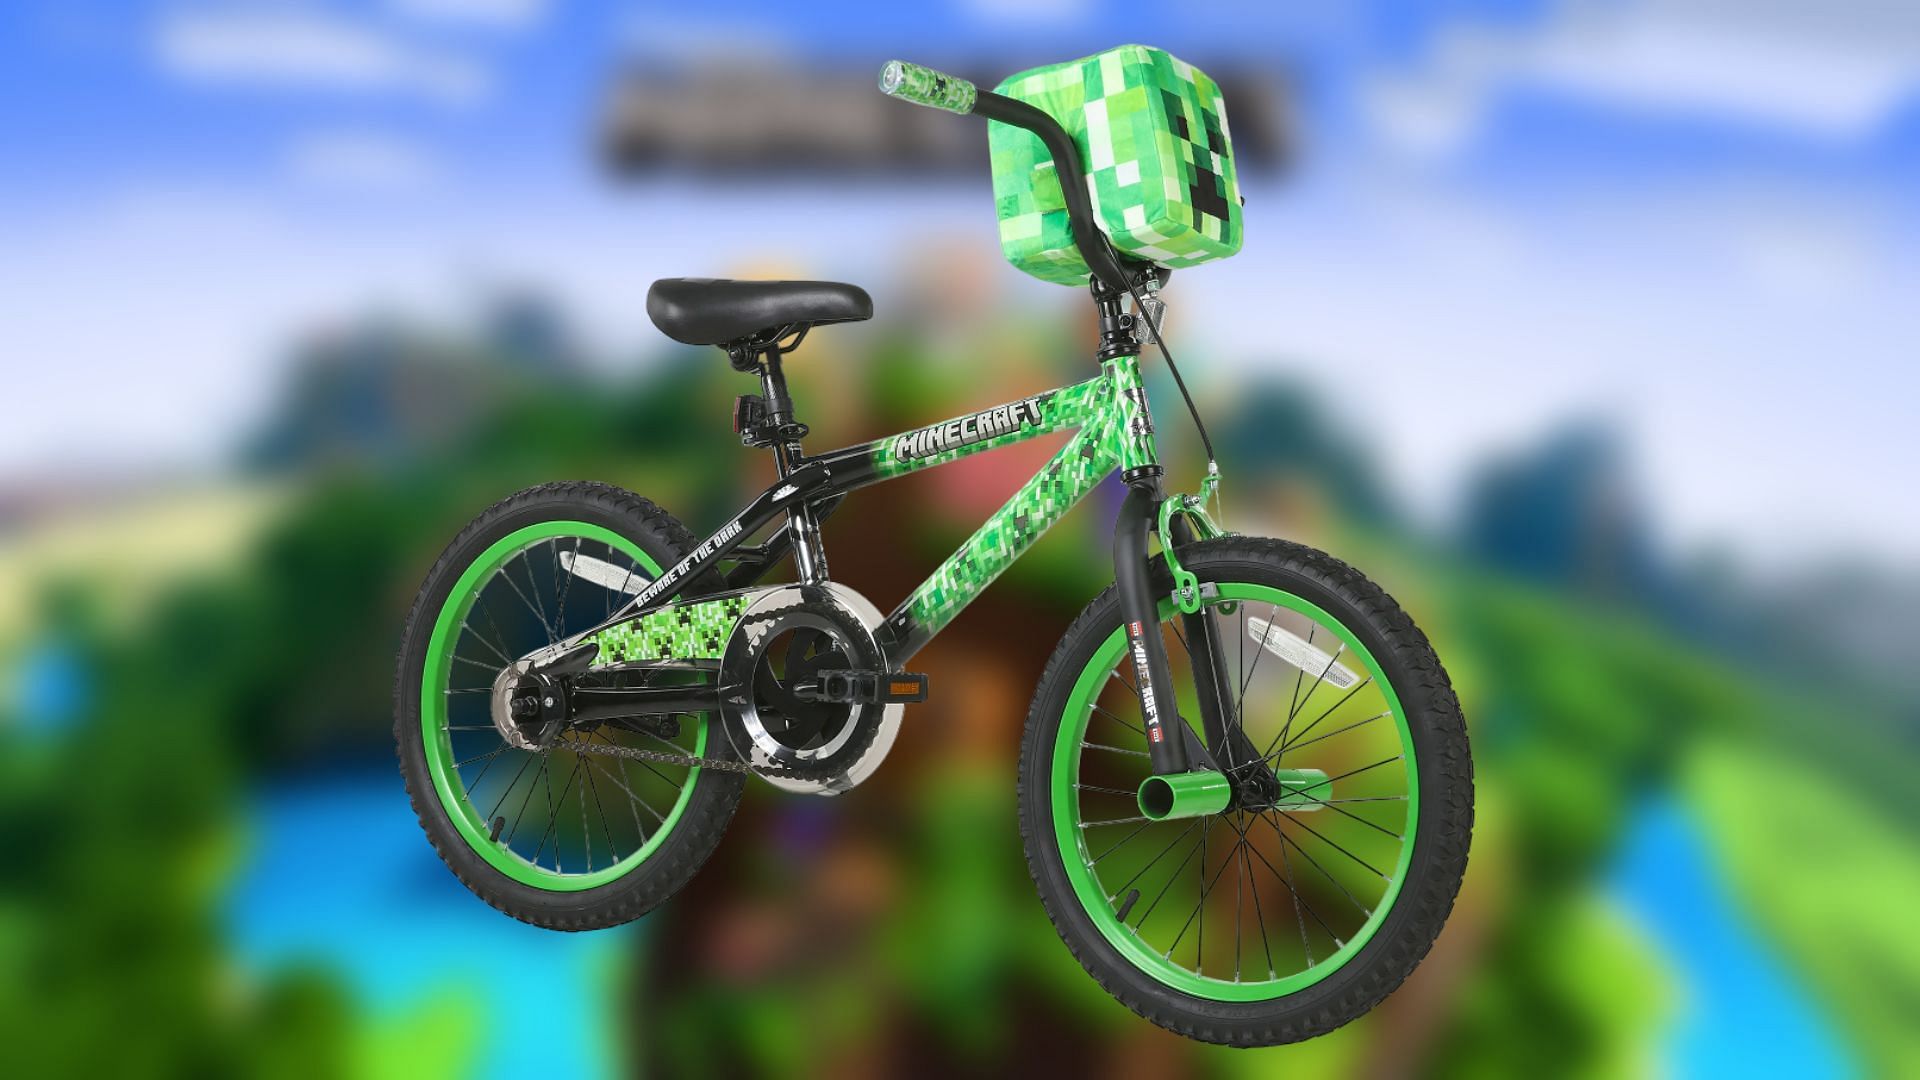 Minecraft announces creeper-themed bicycle